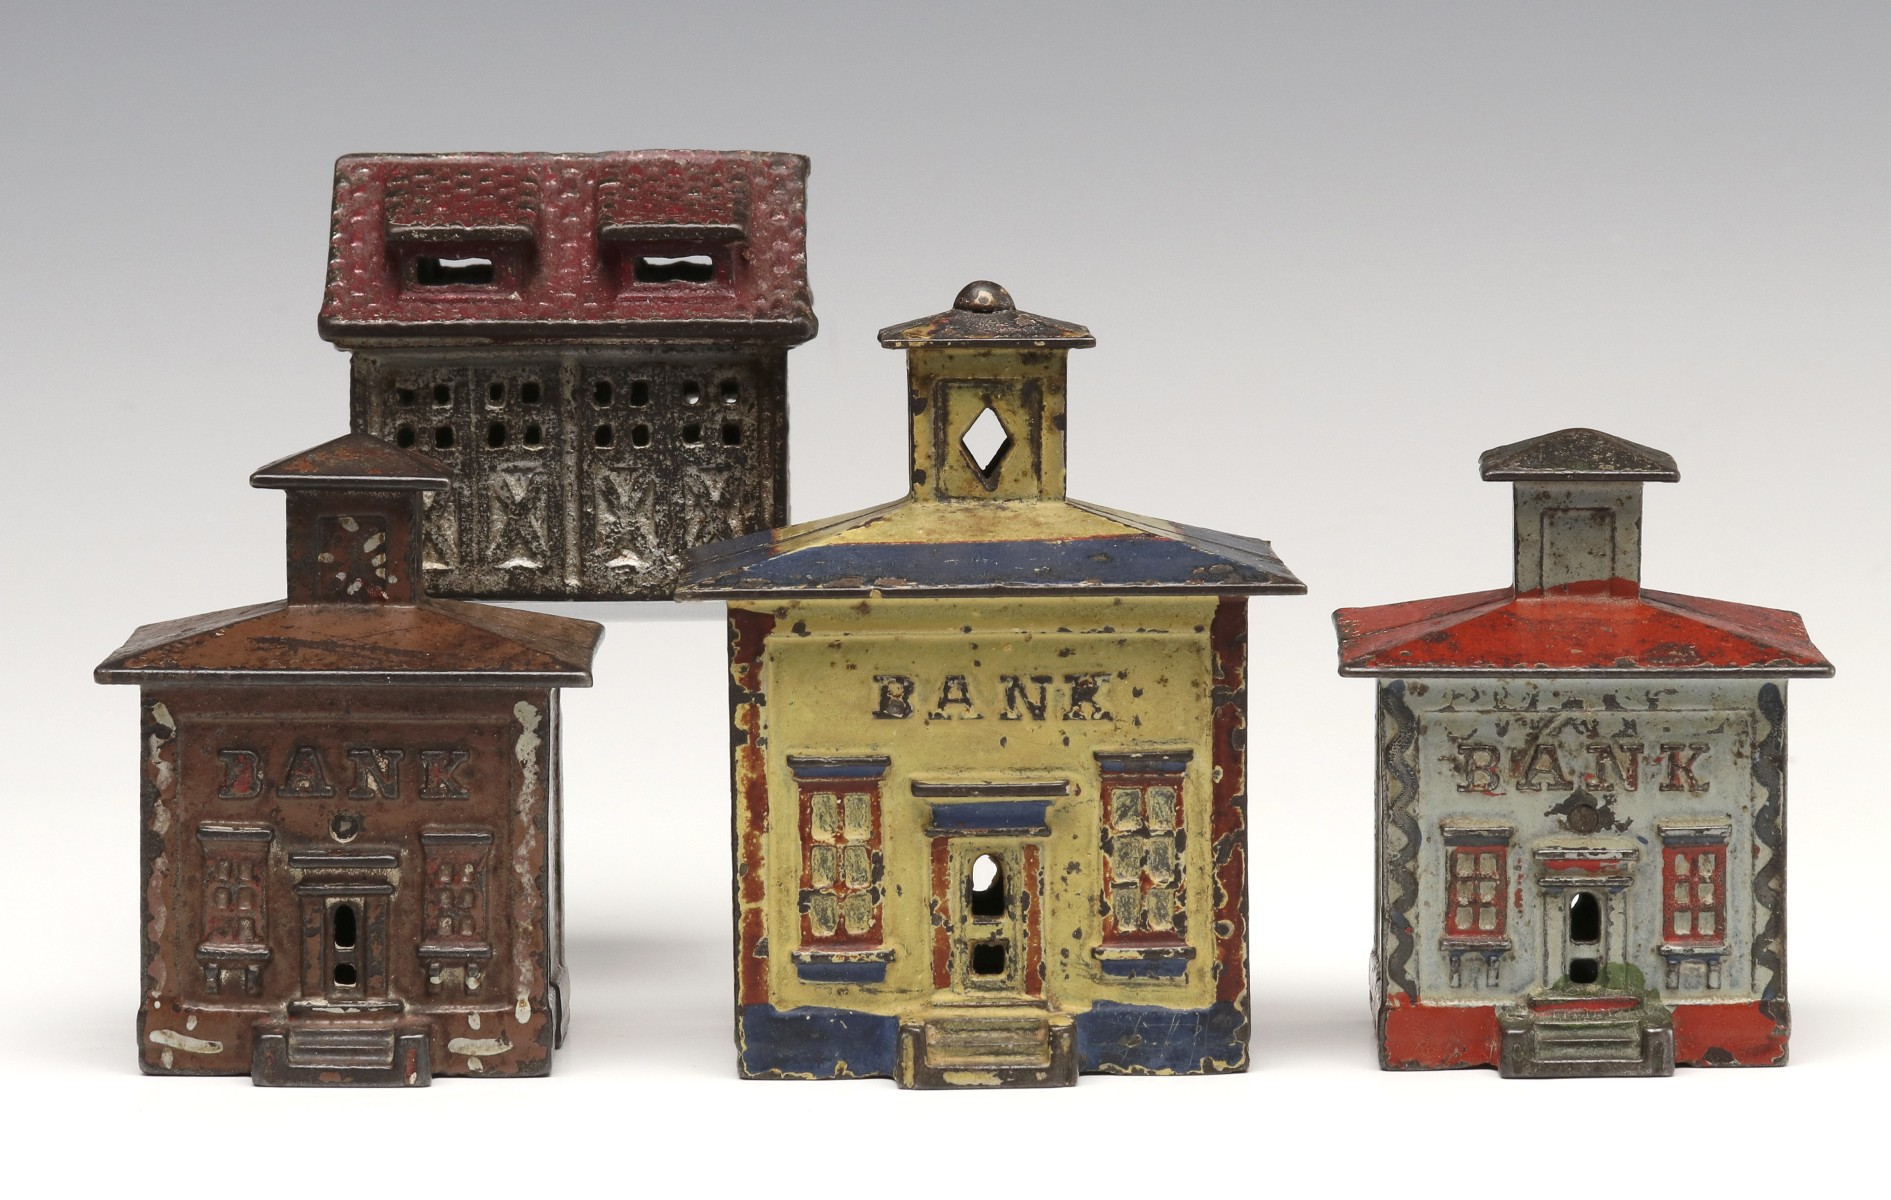 A COLLECTION OF CAST IRON STILL BANK BUILDINGS